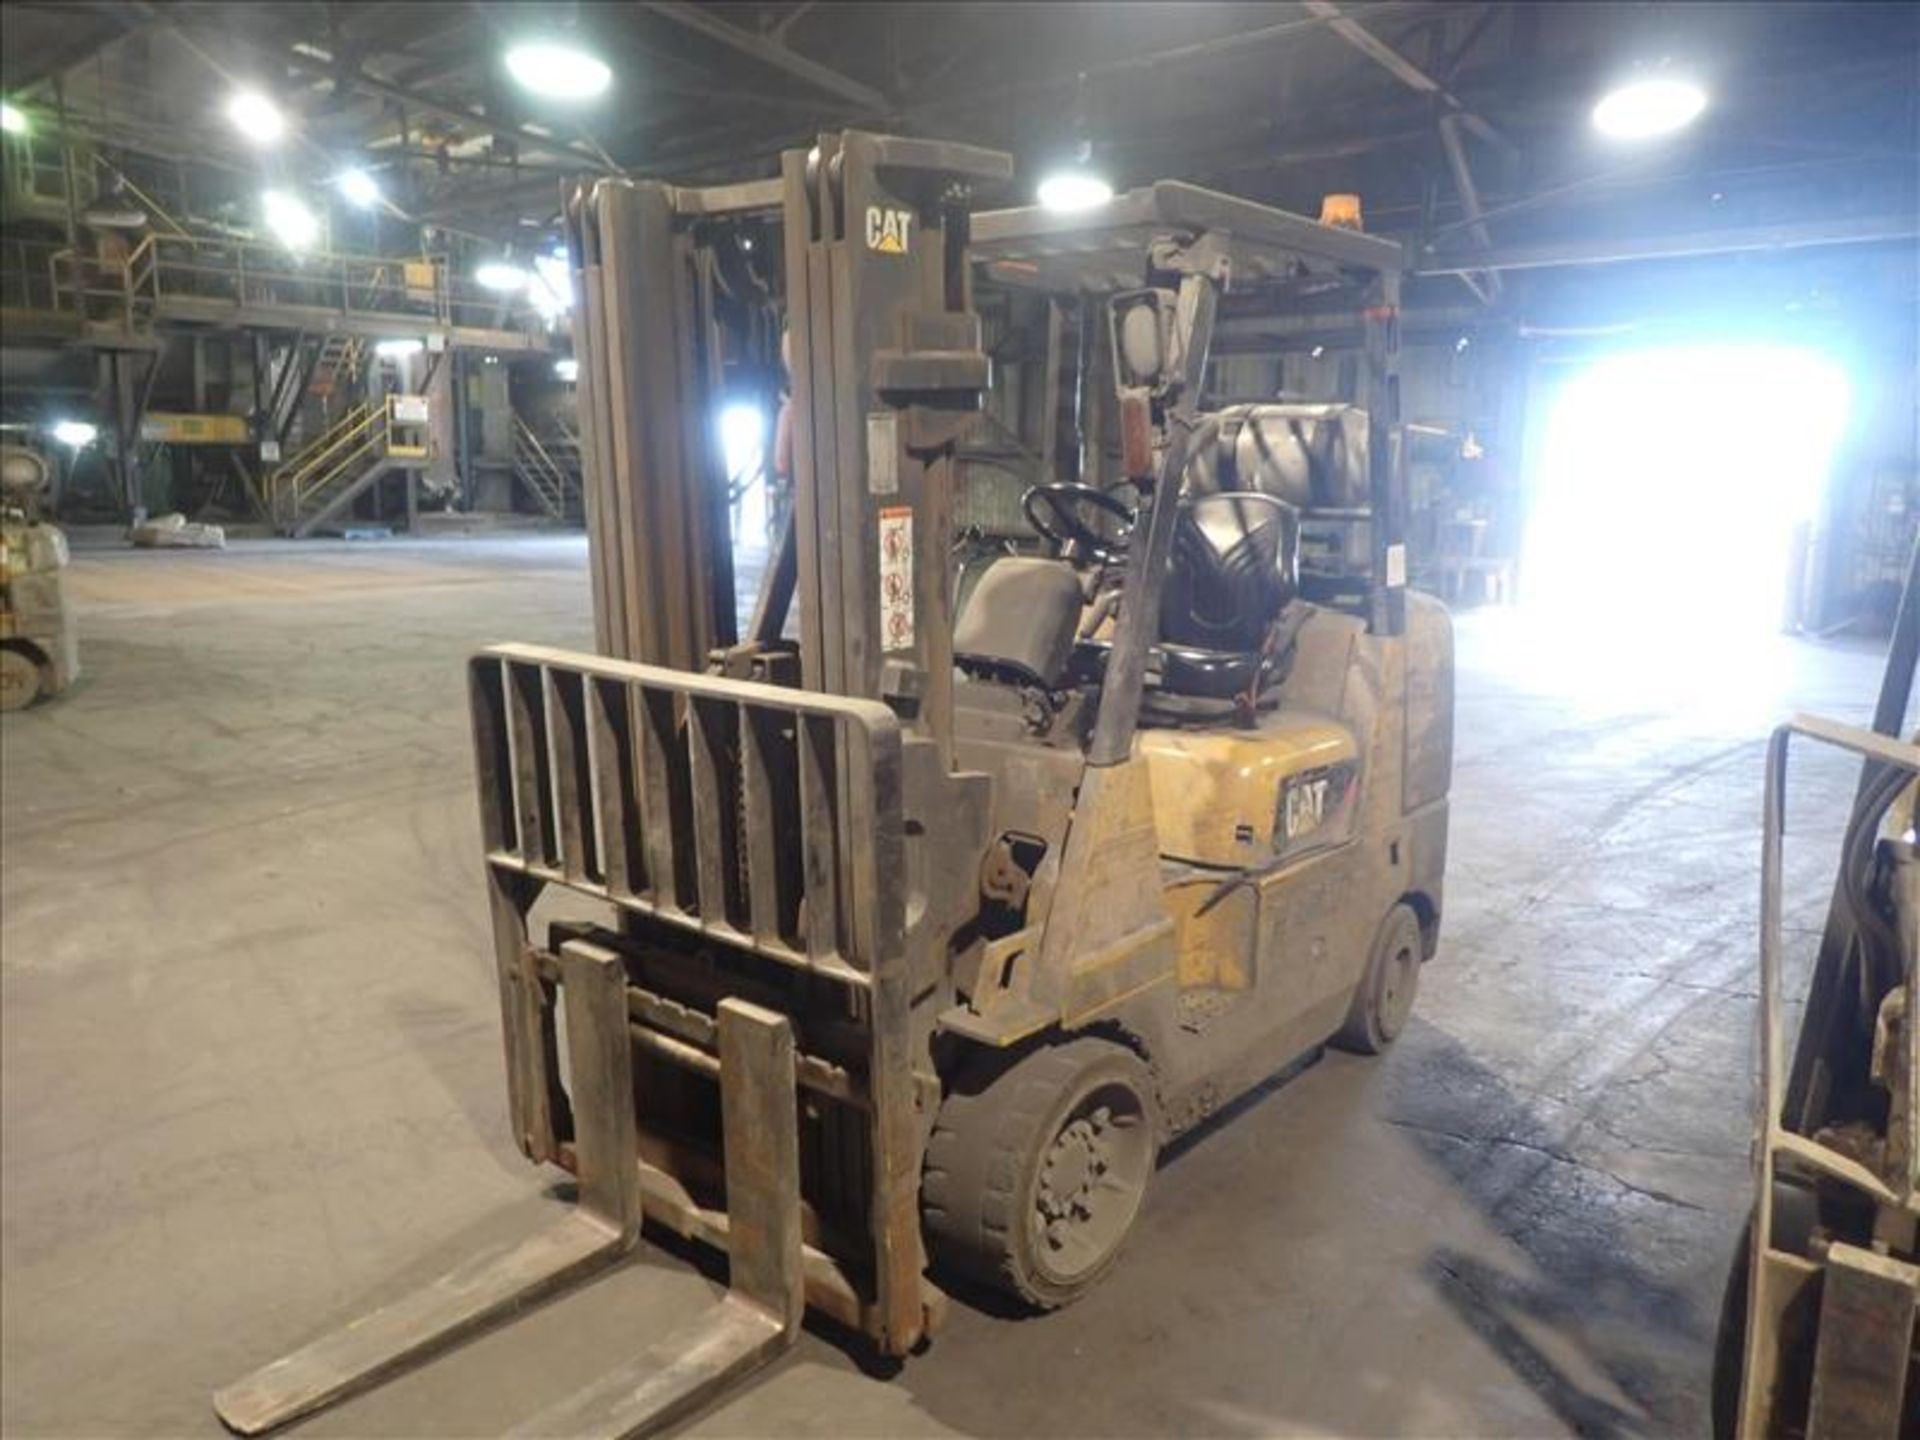 CAT forklift truck, mod. GC35K, ser. no. AT87A30862, 6000 lbs cap., propane, 3-stage mast, side-